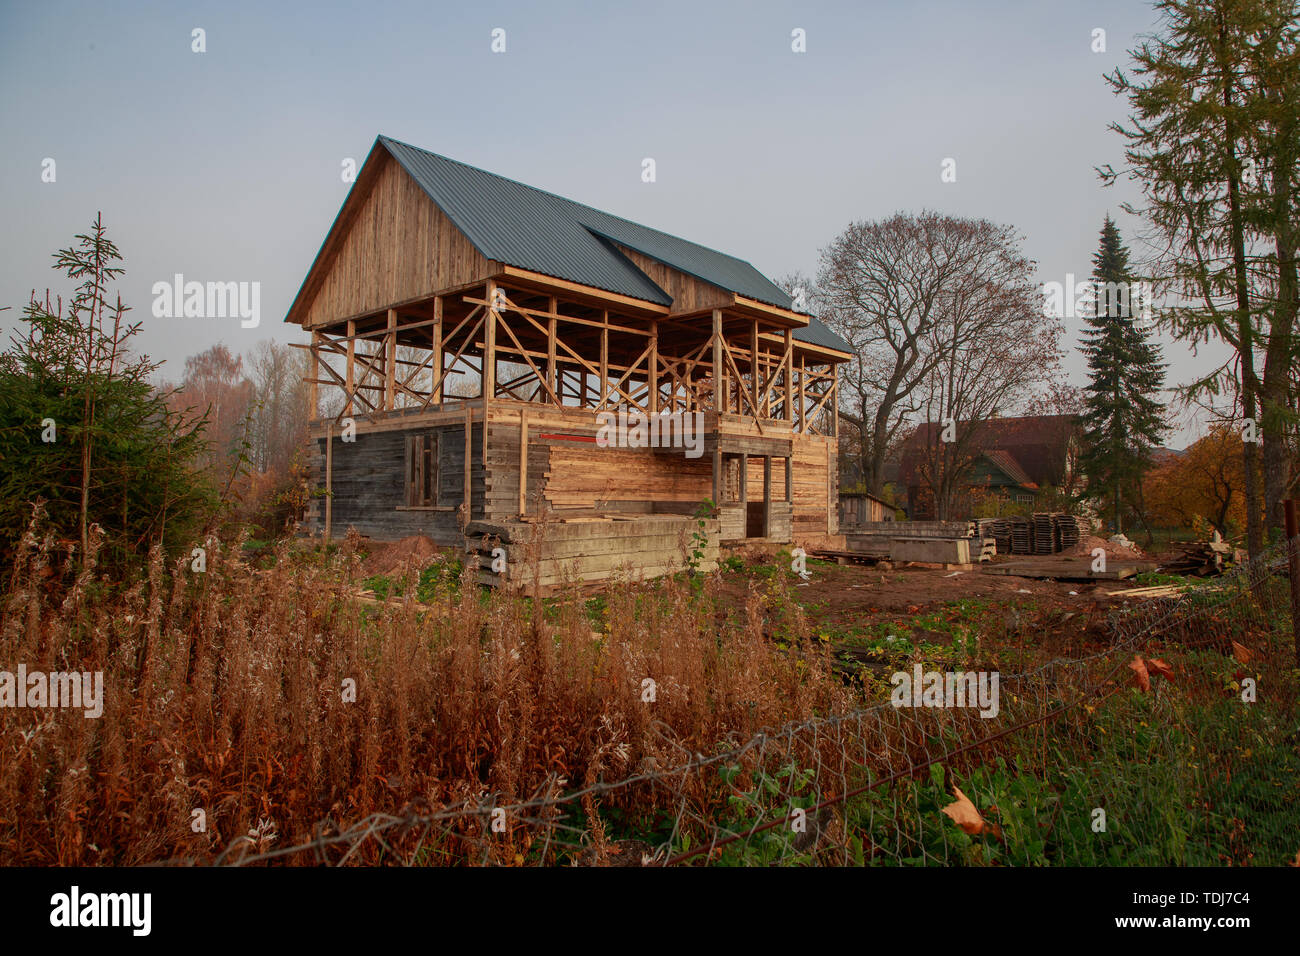 wooden construction of the house in the daytime outside view Stock Photo